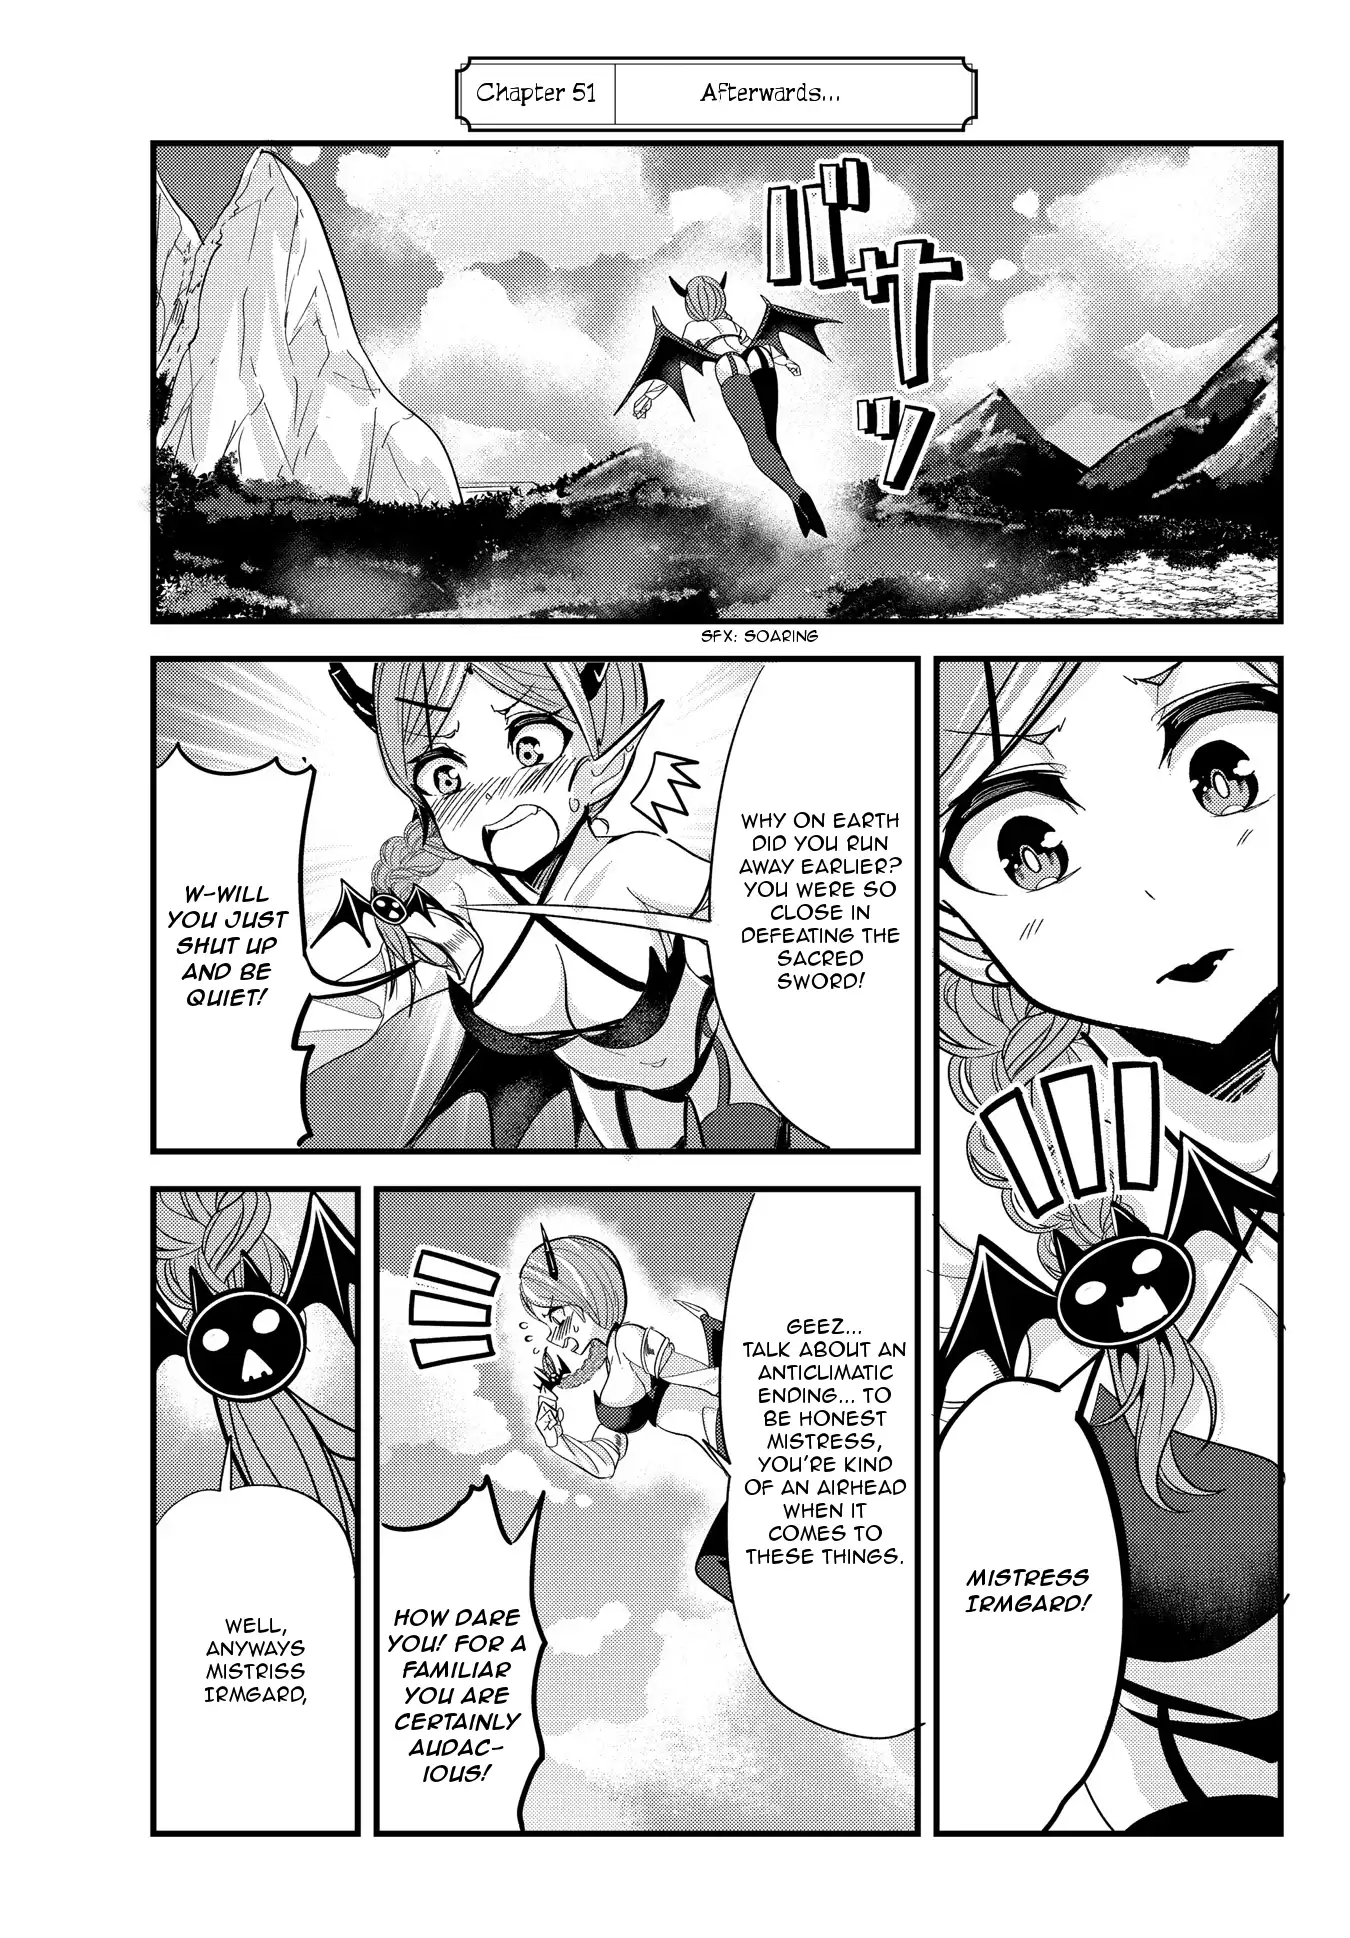 A Story About Treating a Female Knight, Who Has Never Been Treated as a Woman, as a Woman - Chapter 51 Page 1